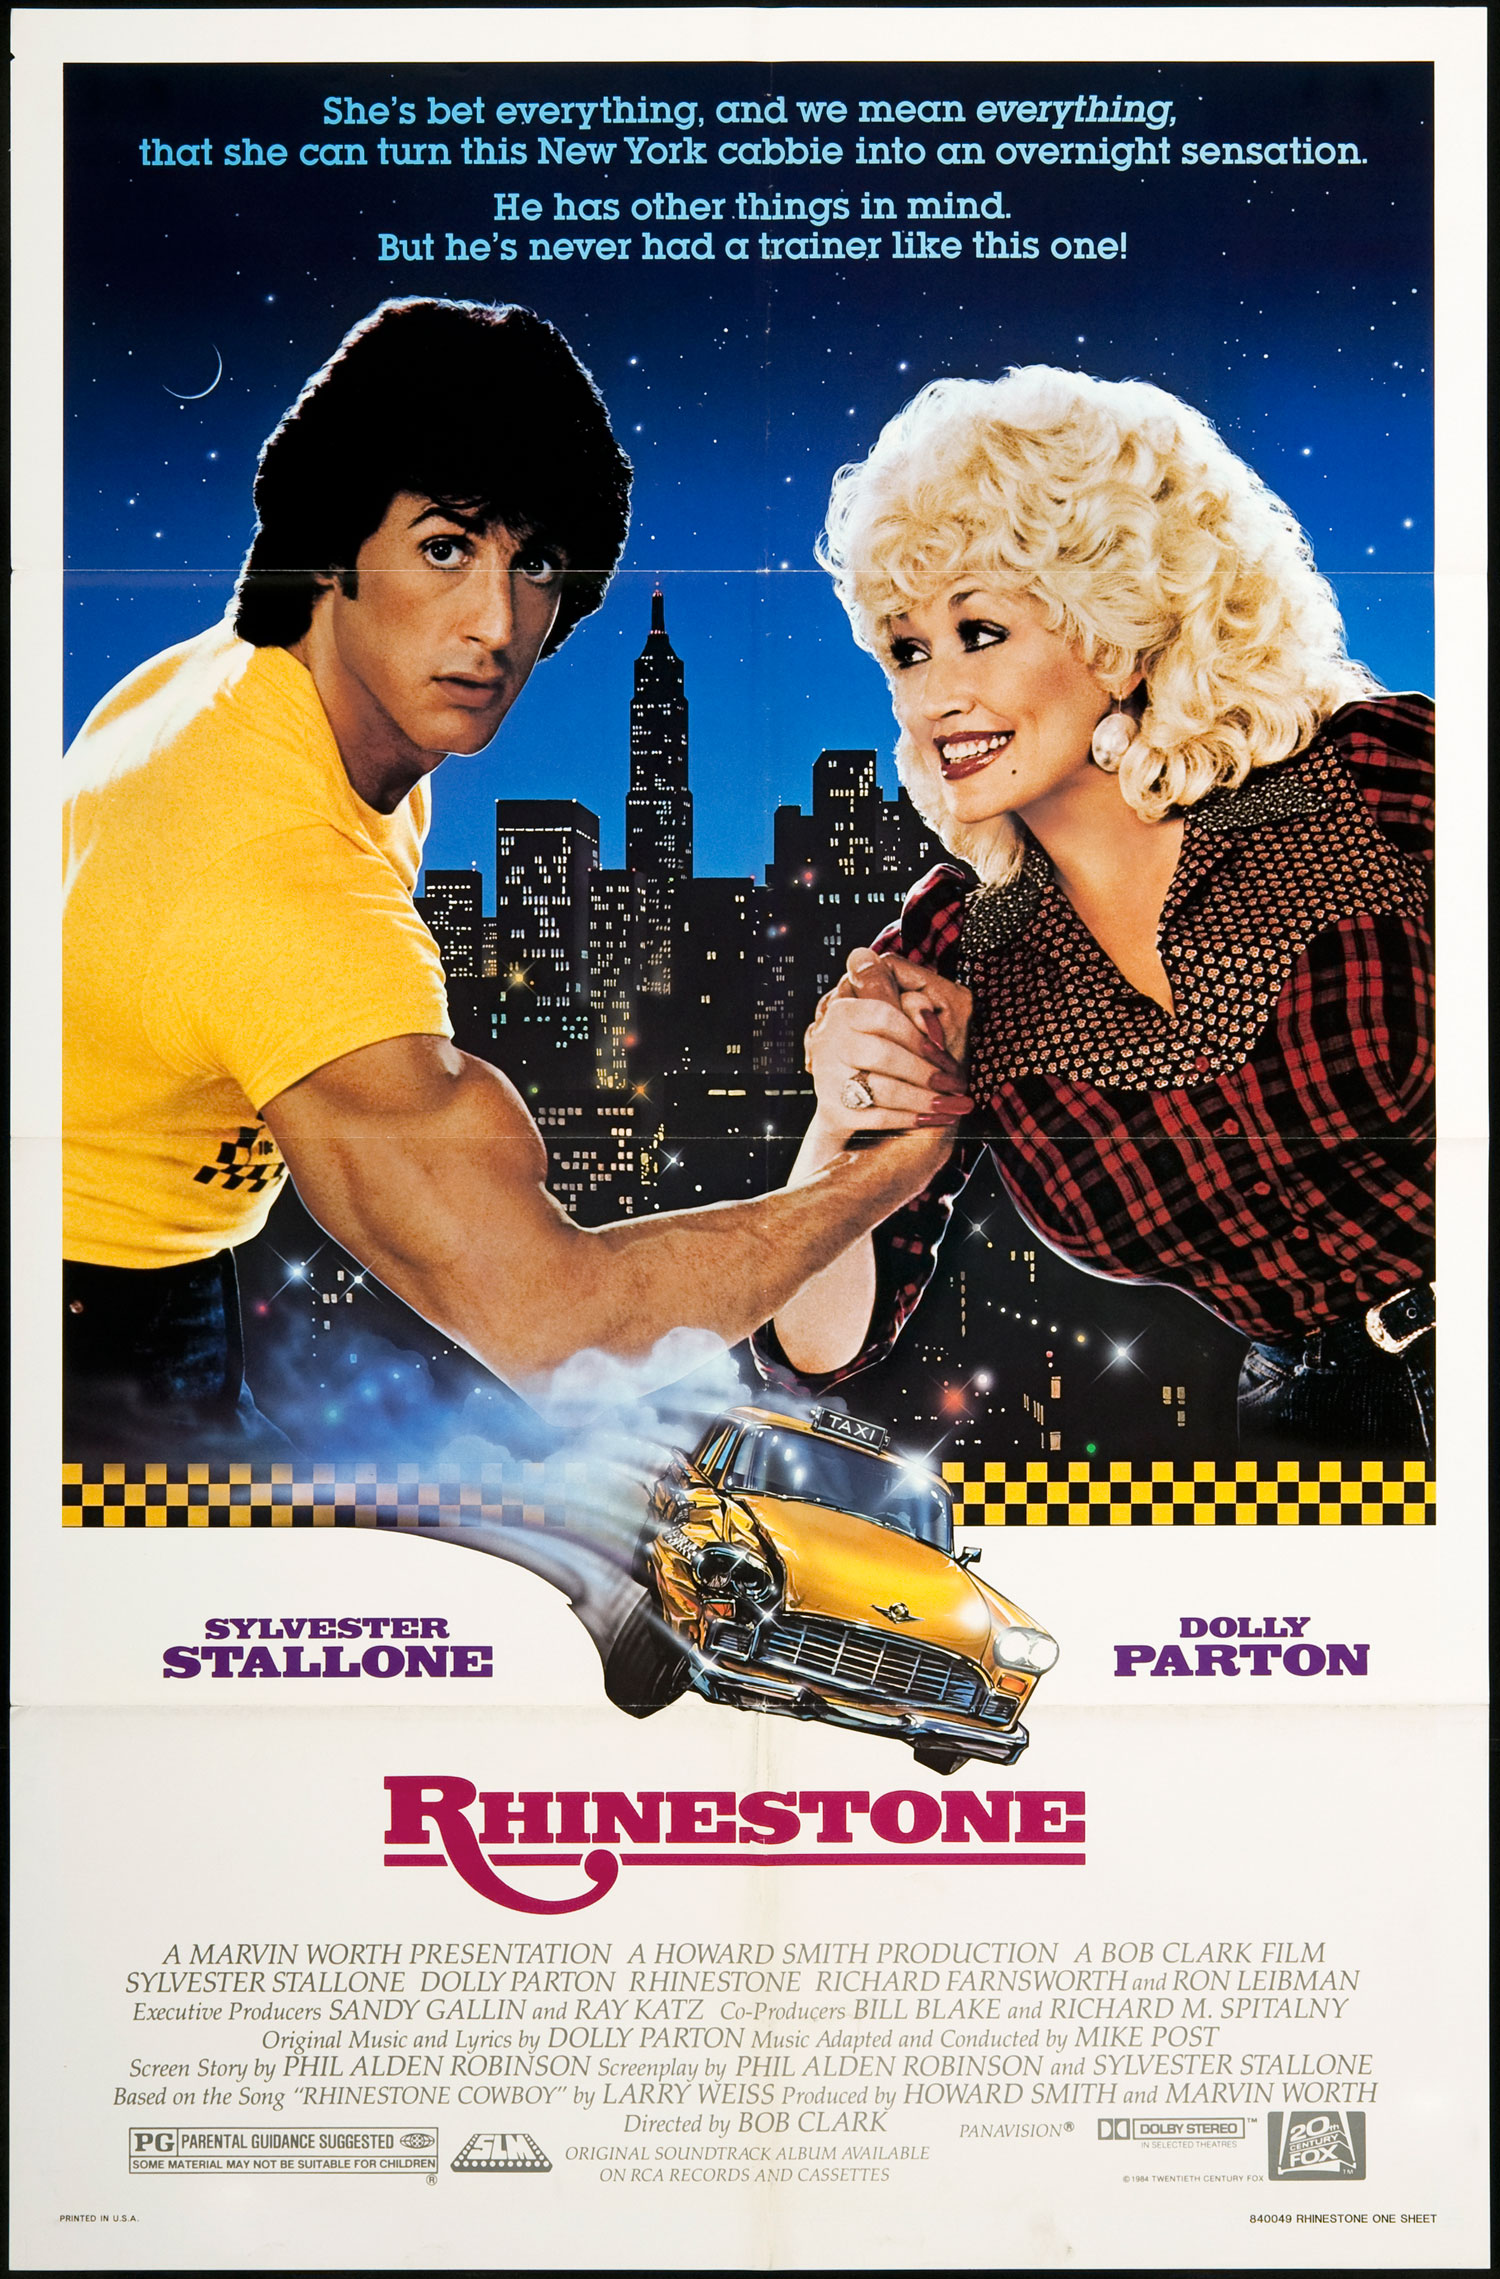 Sylvester Stallone And Dolly Parton Probably Pretend This Movie Never Happened